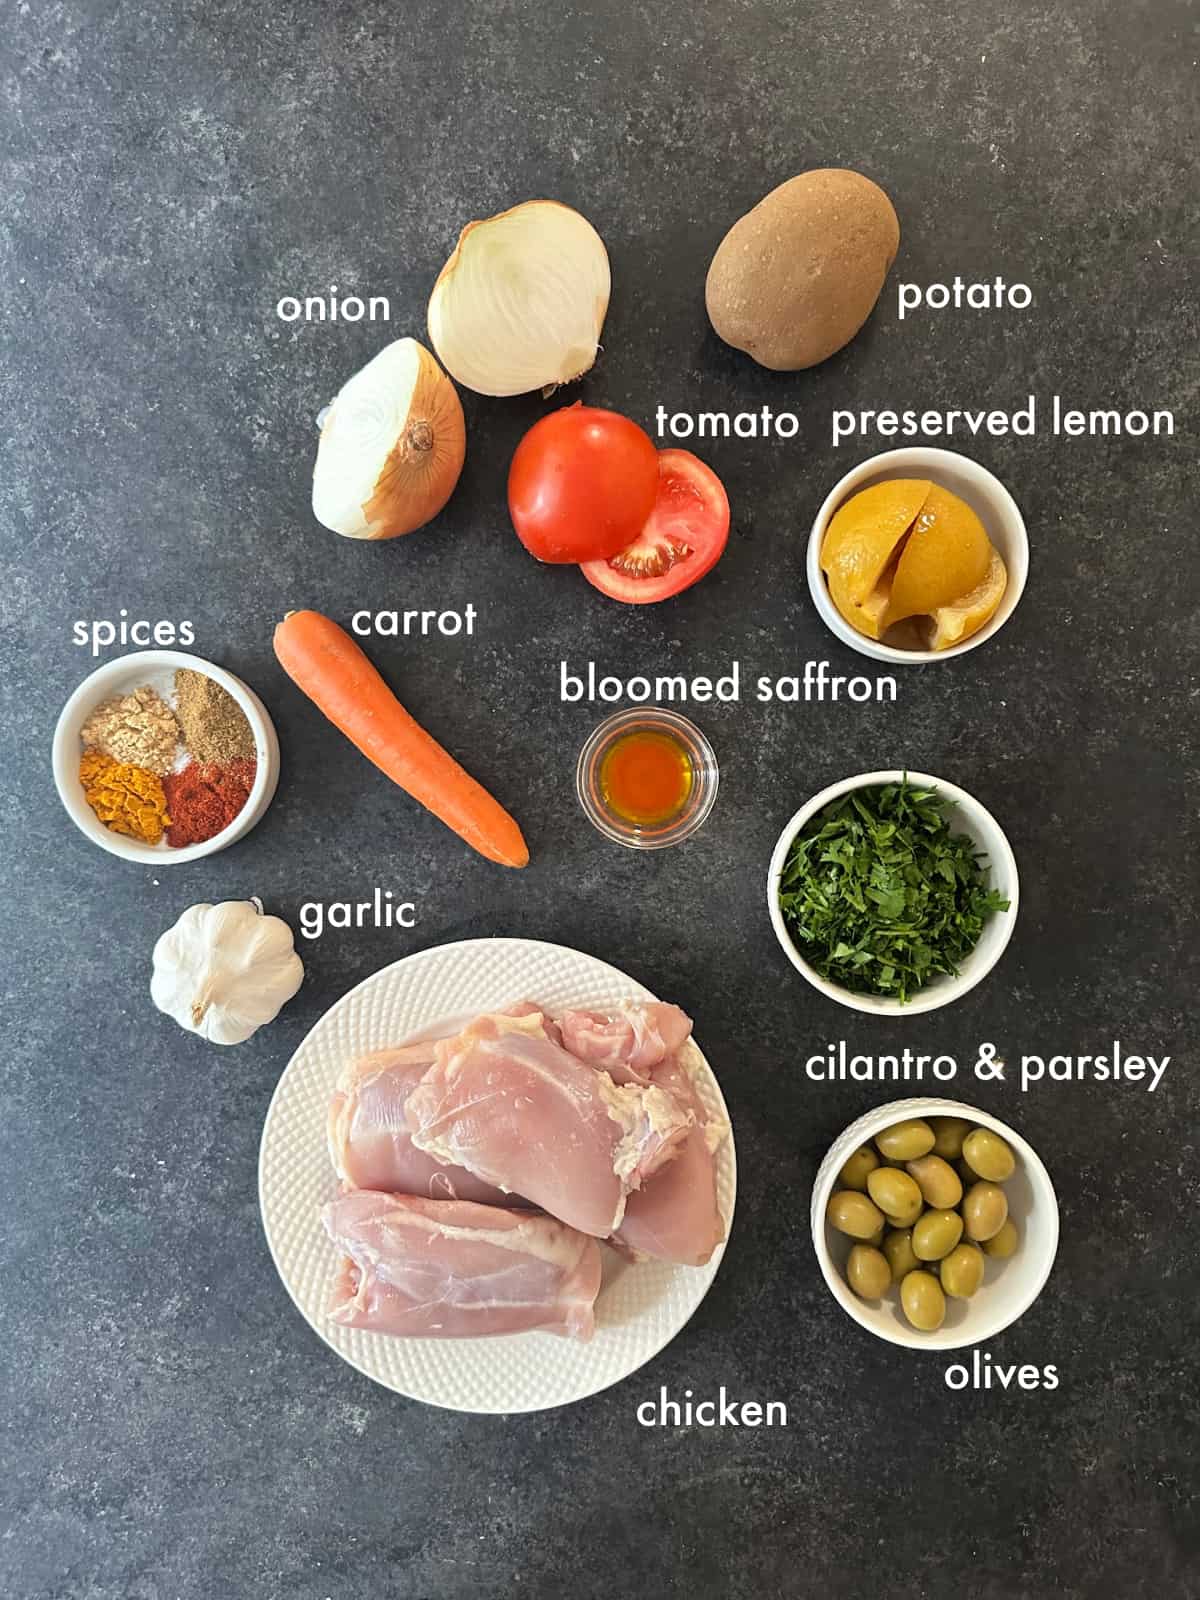 To make chicken tagine you need chicken, spices, garlic, herbs, olive oil. vegetables and preserved lemon. 